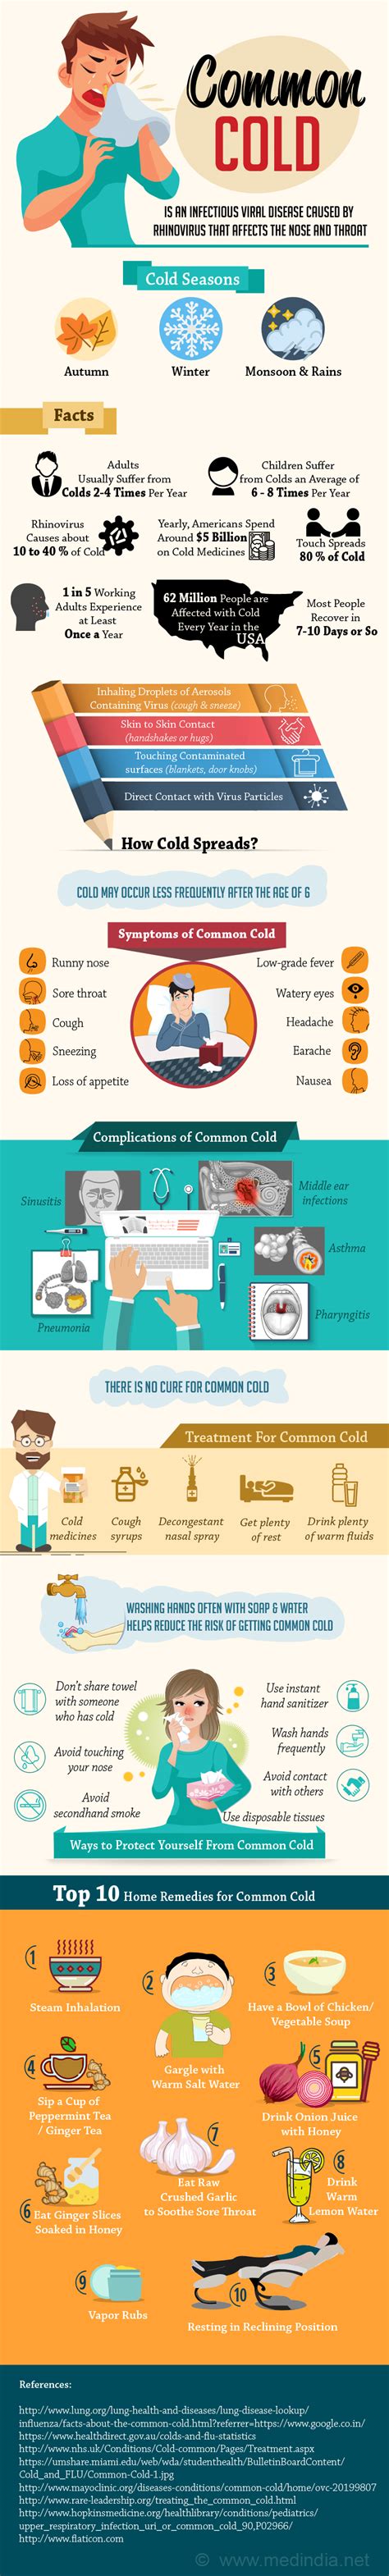 Infographic On Common Cold